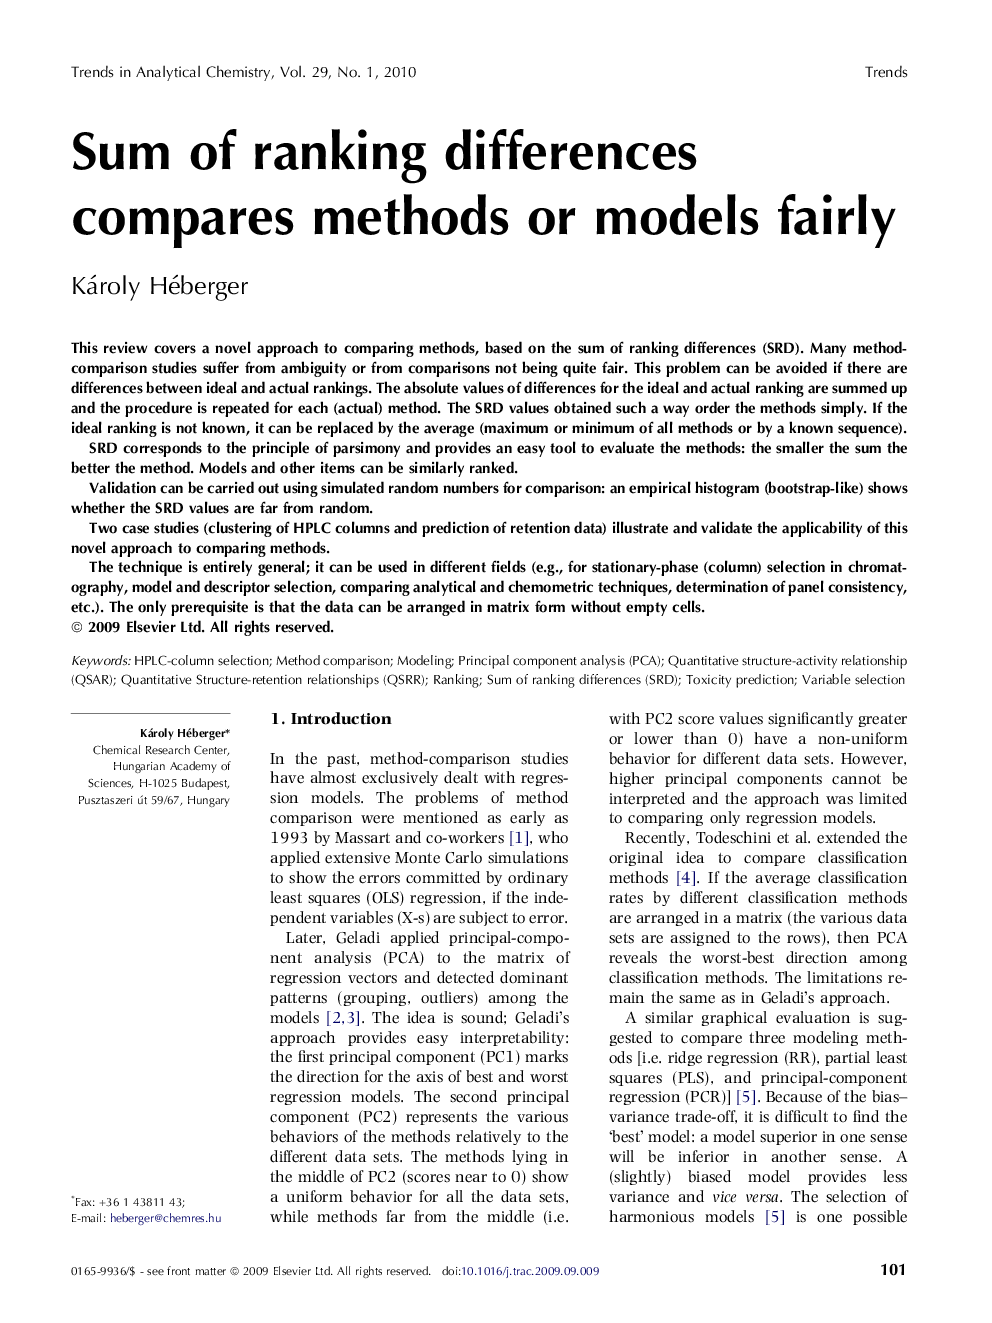 Sum of ranking differences compares methods or models fairly